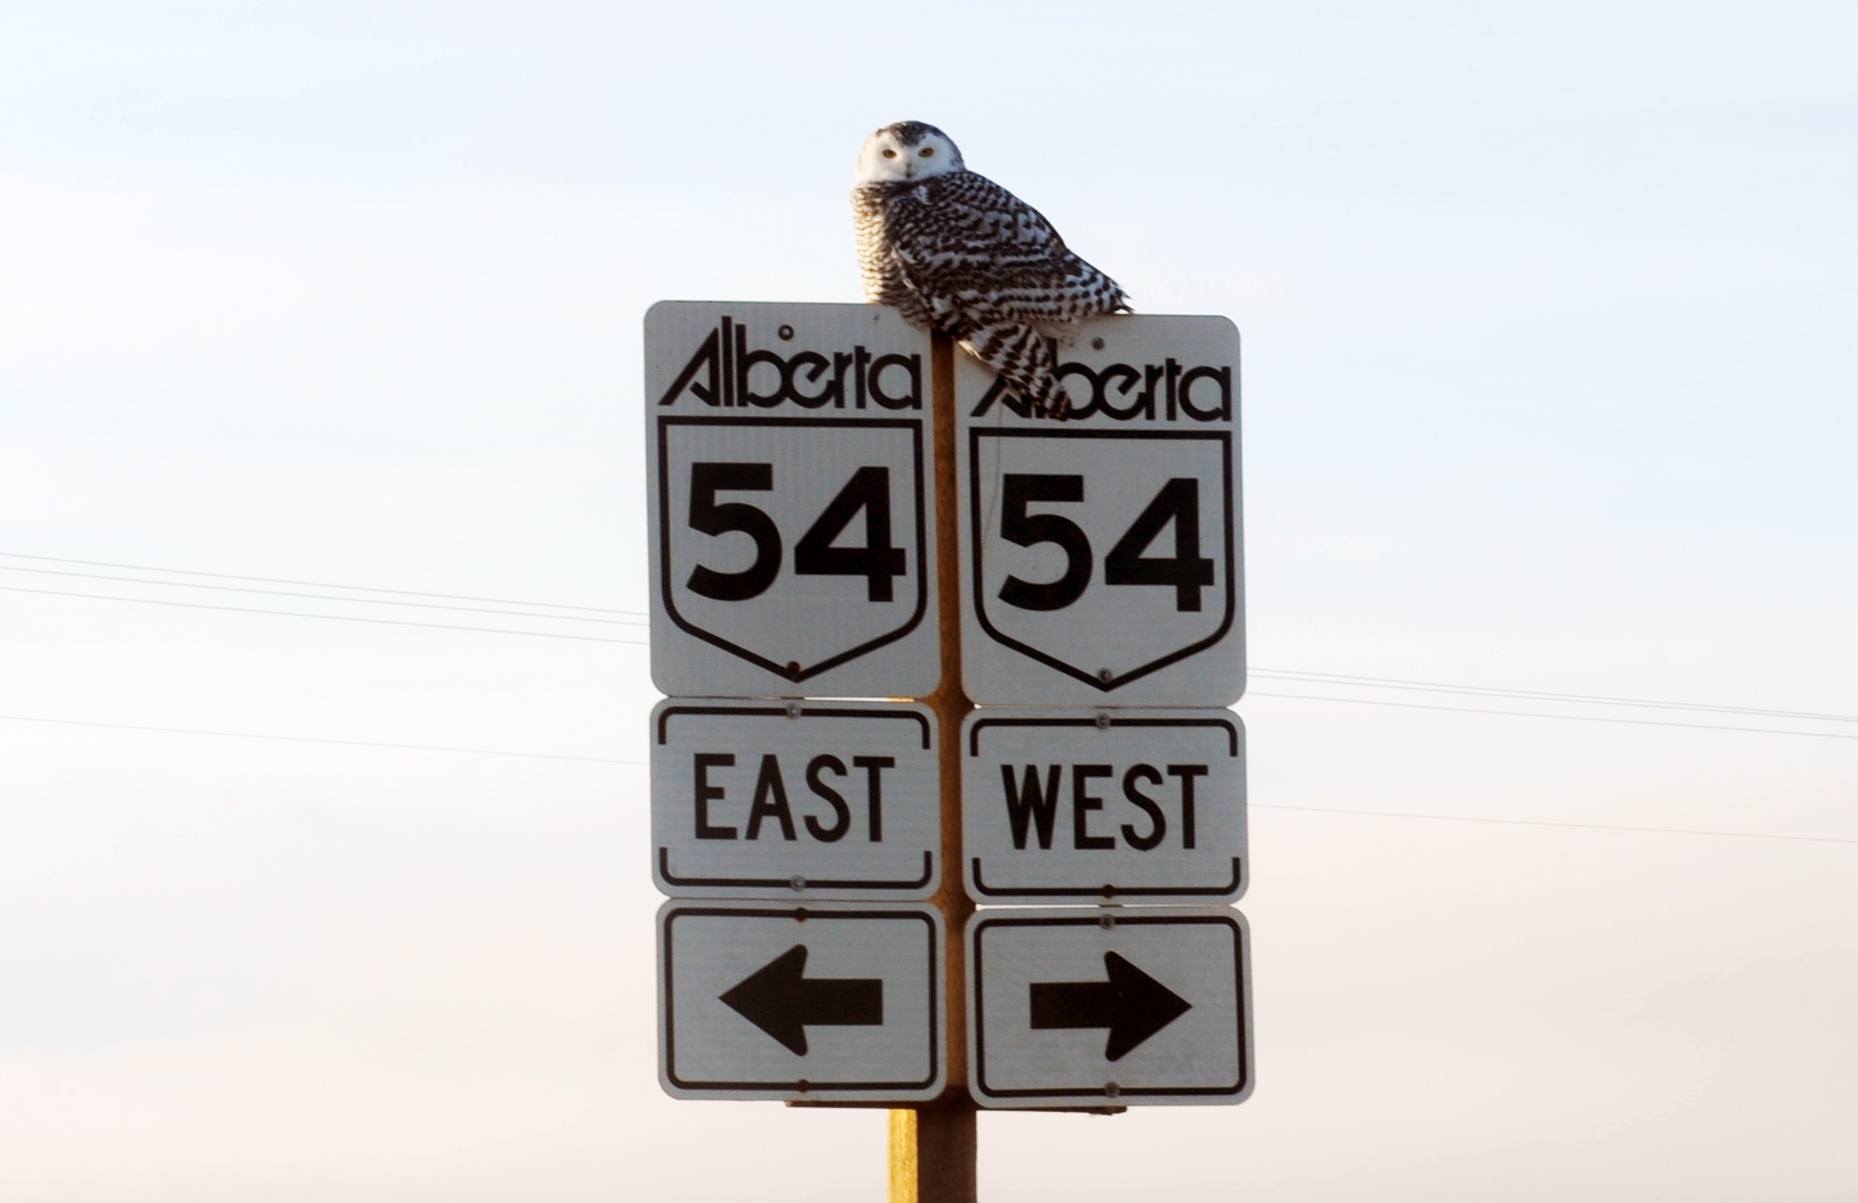 EAST TO WEST- A Snowy Owl sits on a road sign recently along a Red Deer County road recently.